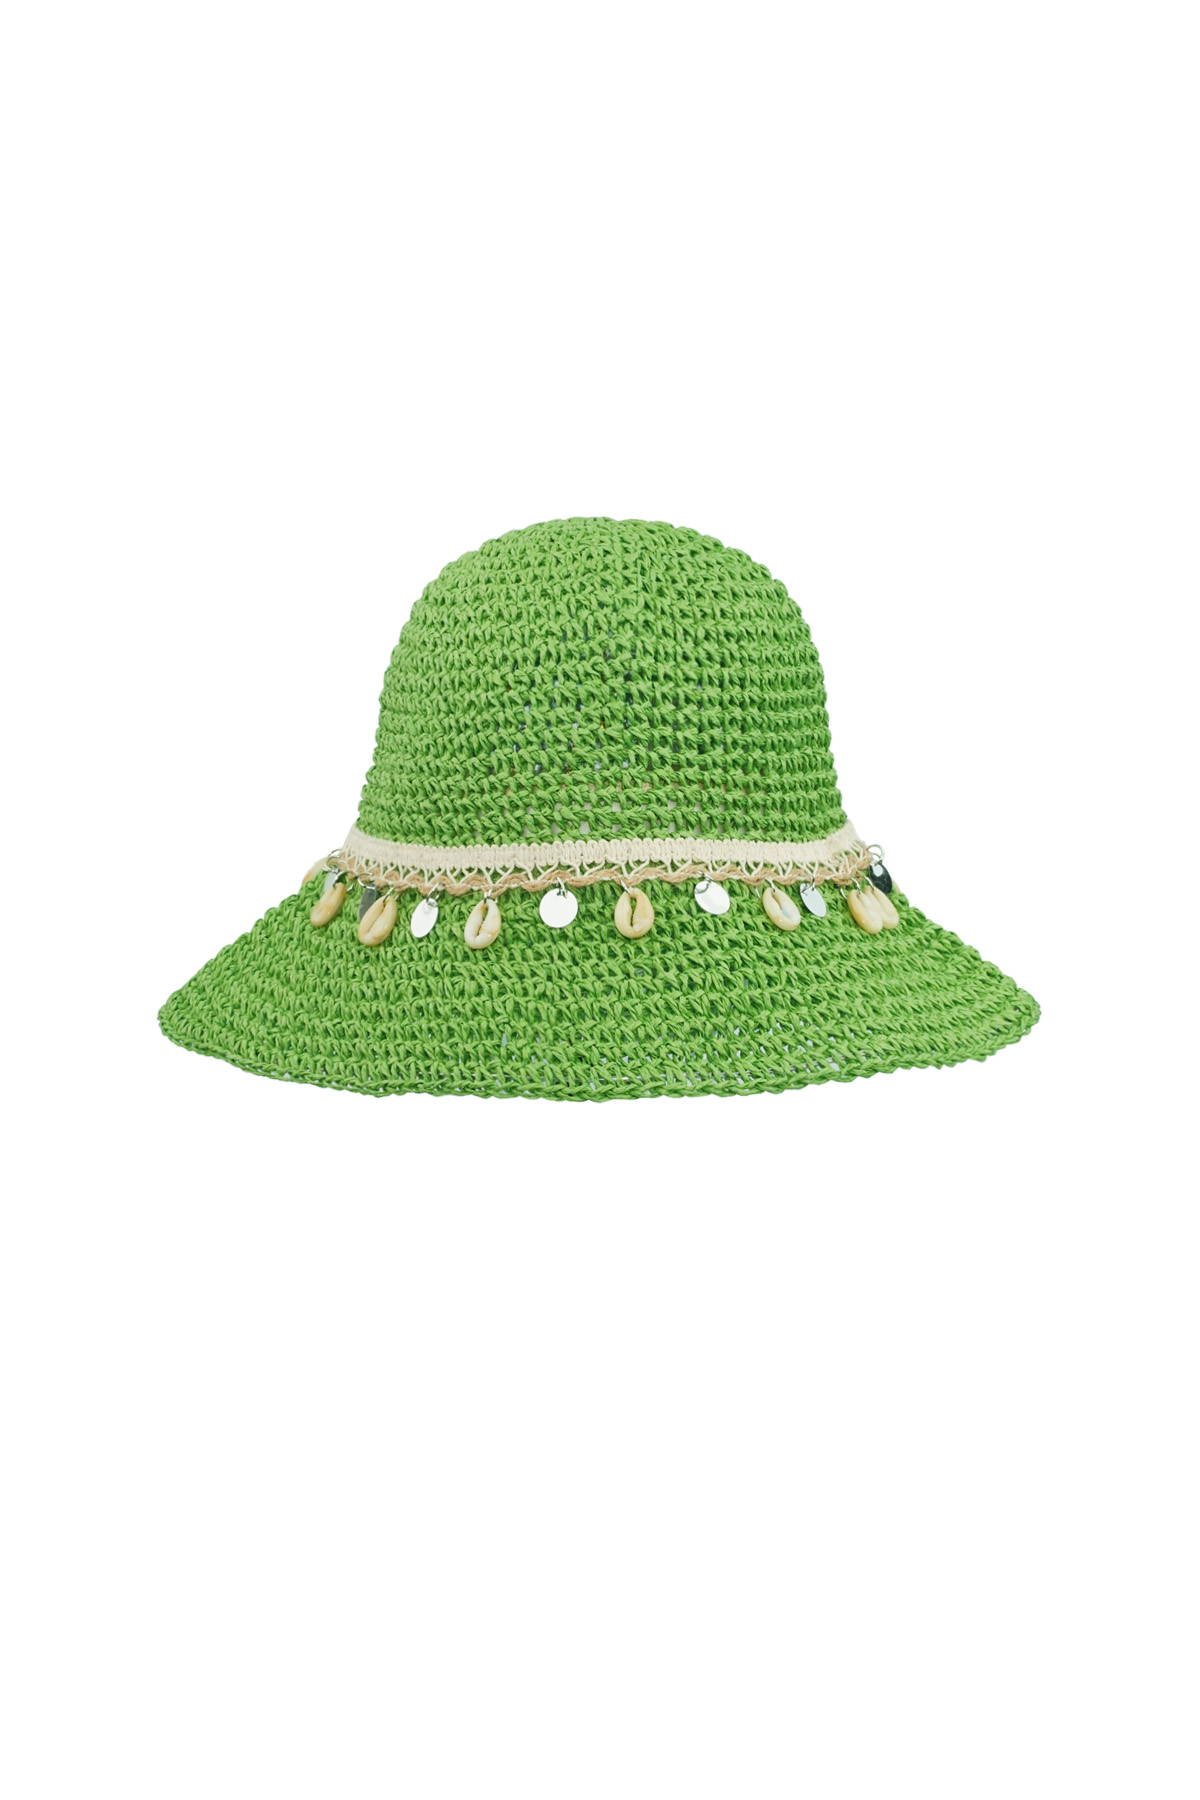 Beach hat with shells - green 